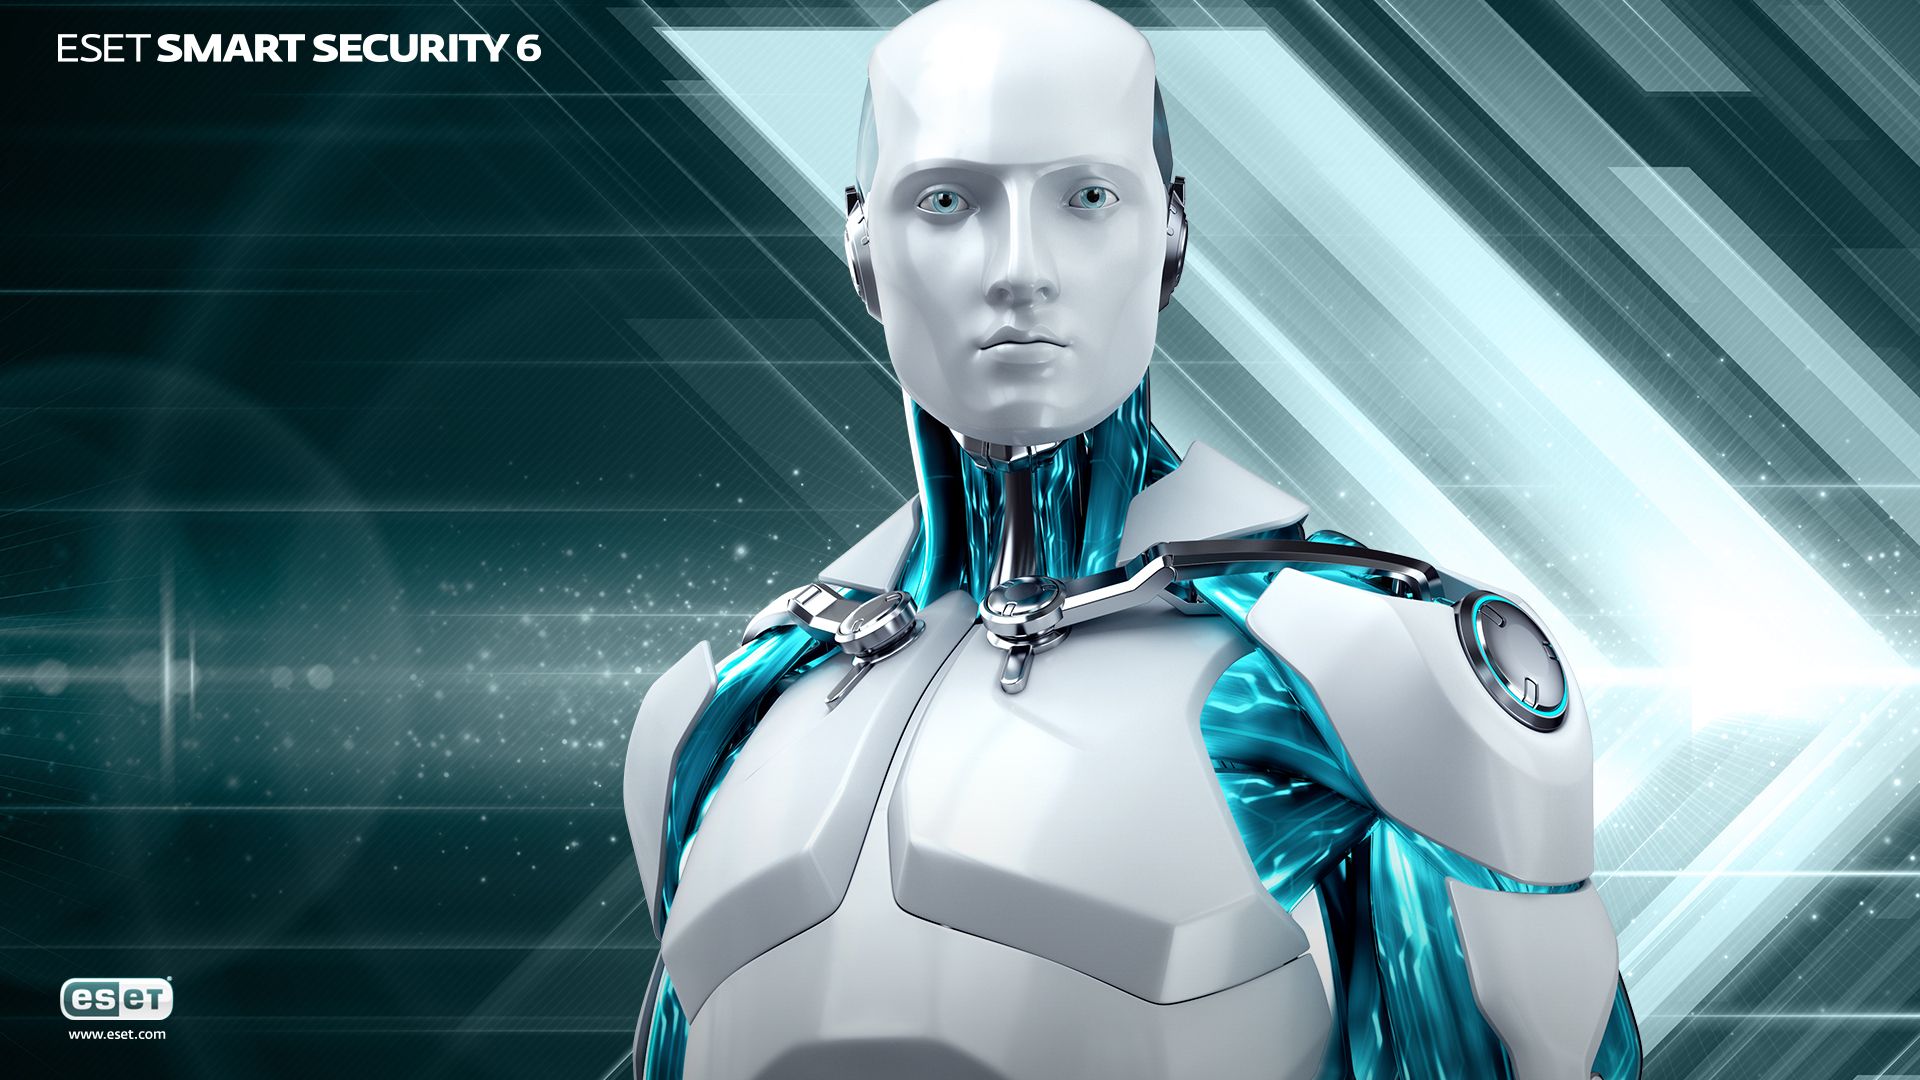 ESET - Do you like our new Samsung Galaxy S3/S4, HTC ONE wallpaper?  Resolution 1080x1920 px | Facebook